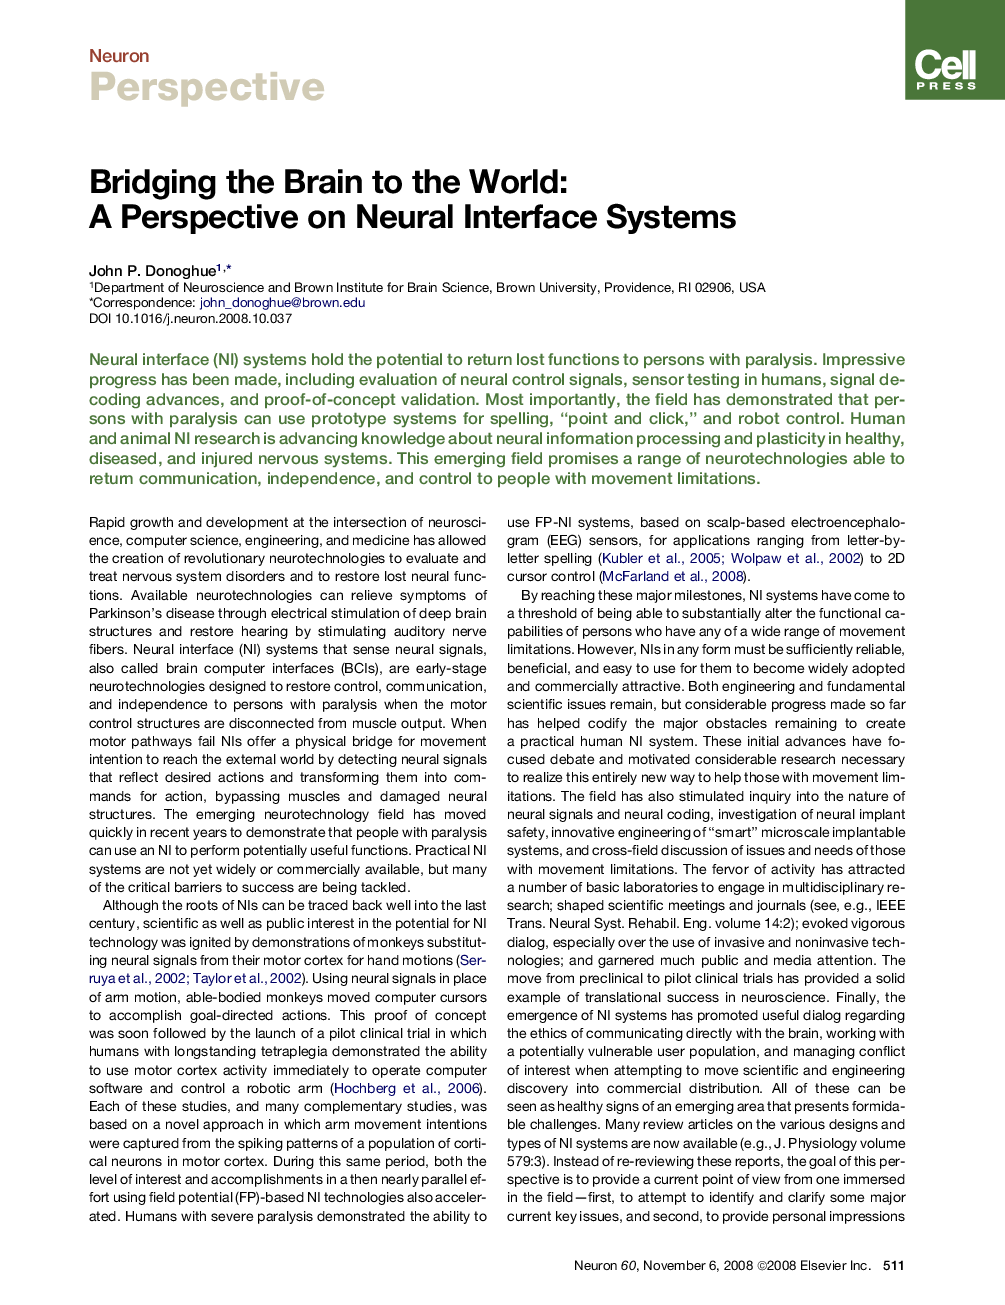 Bridging the Brain to the World: A Perspective on Neural Interface Systems